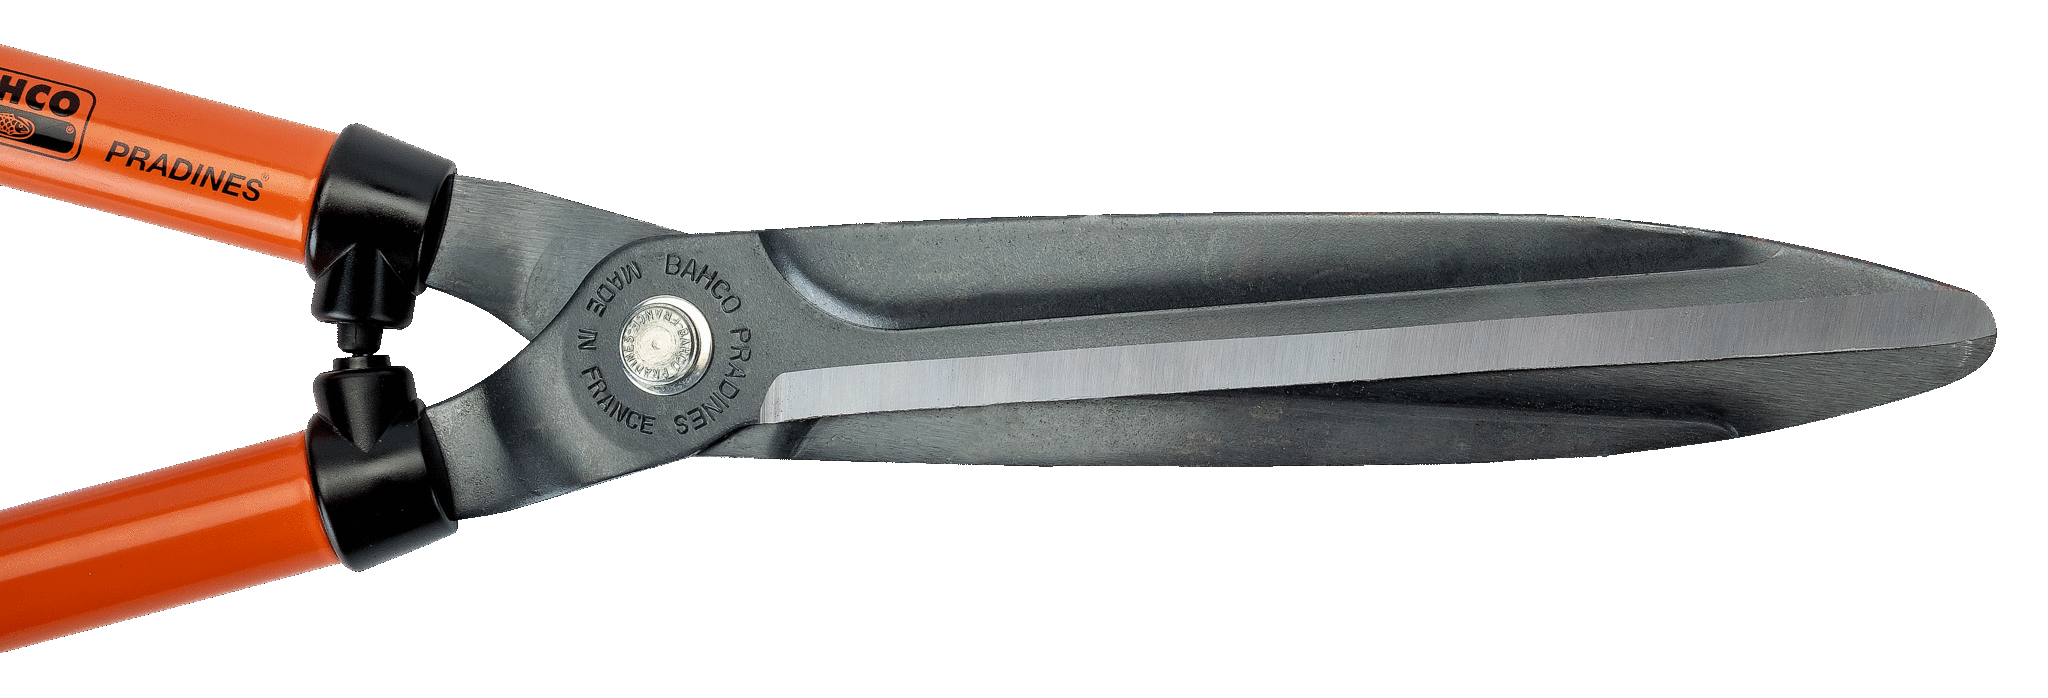 Universal Hedge Shears with Steel Handle, 580mm - P59-25-F by Bahco